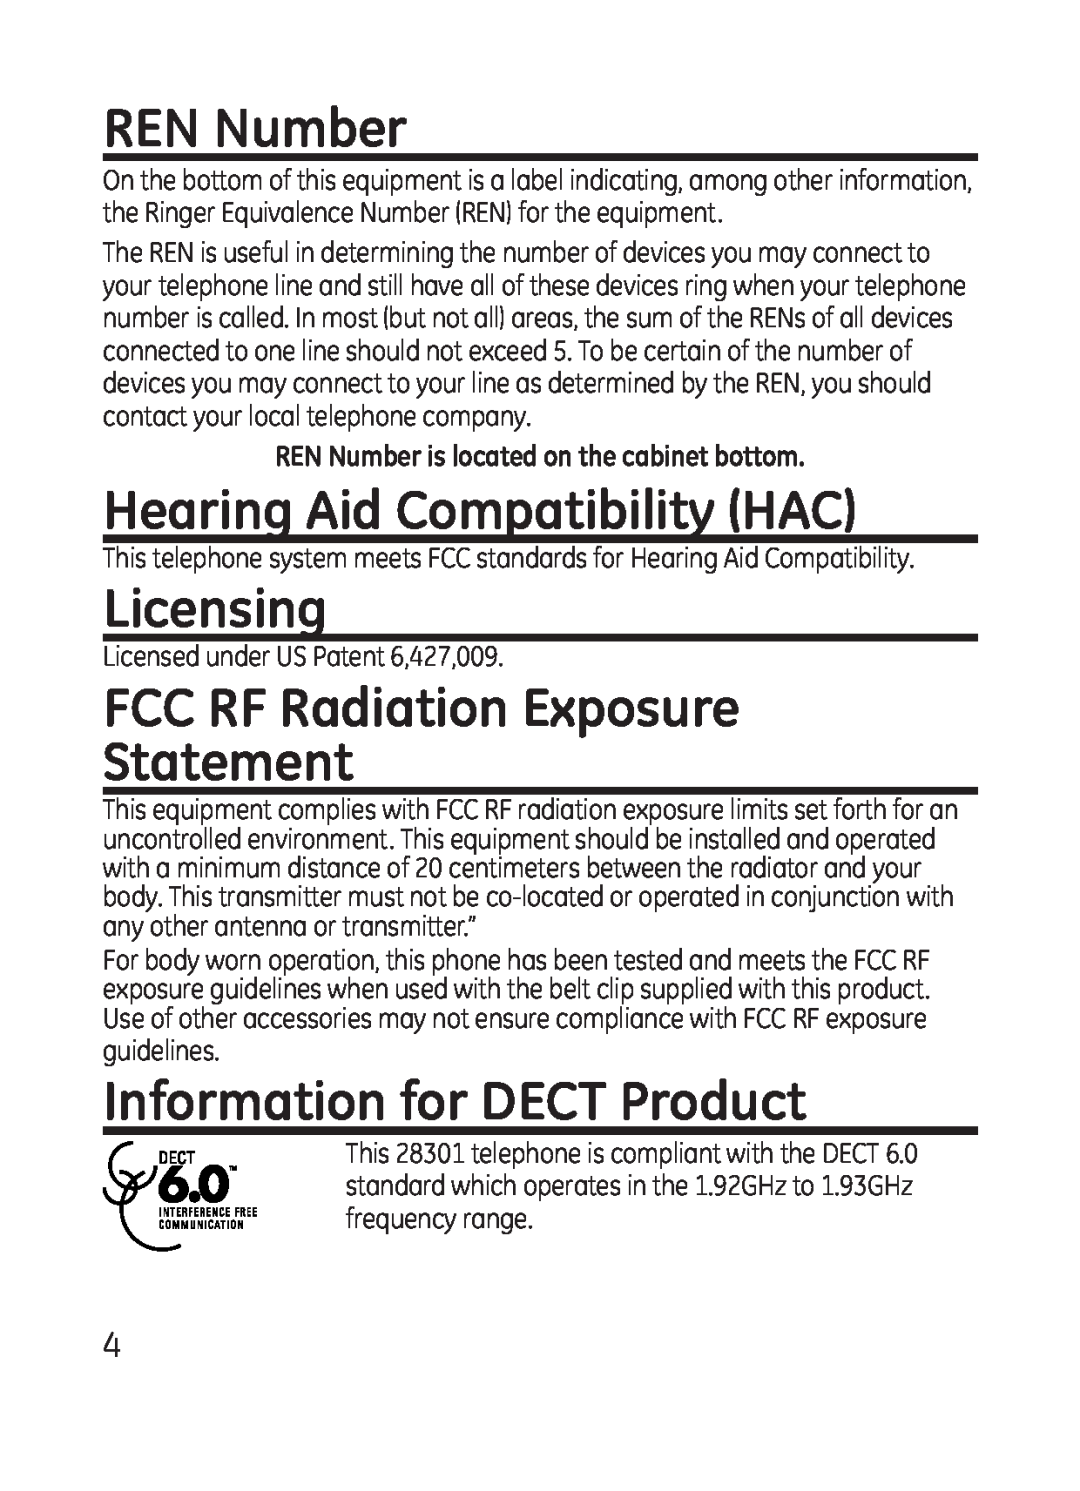 GE 28301 manual REN Number, Hearing Aid Compatibility HAC, Licensing, FCC RF Radiation Exposure Statement 